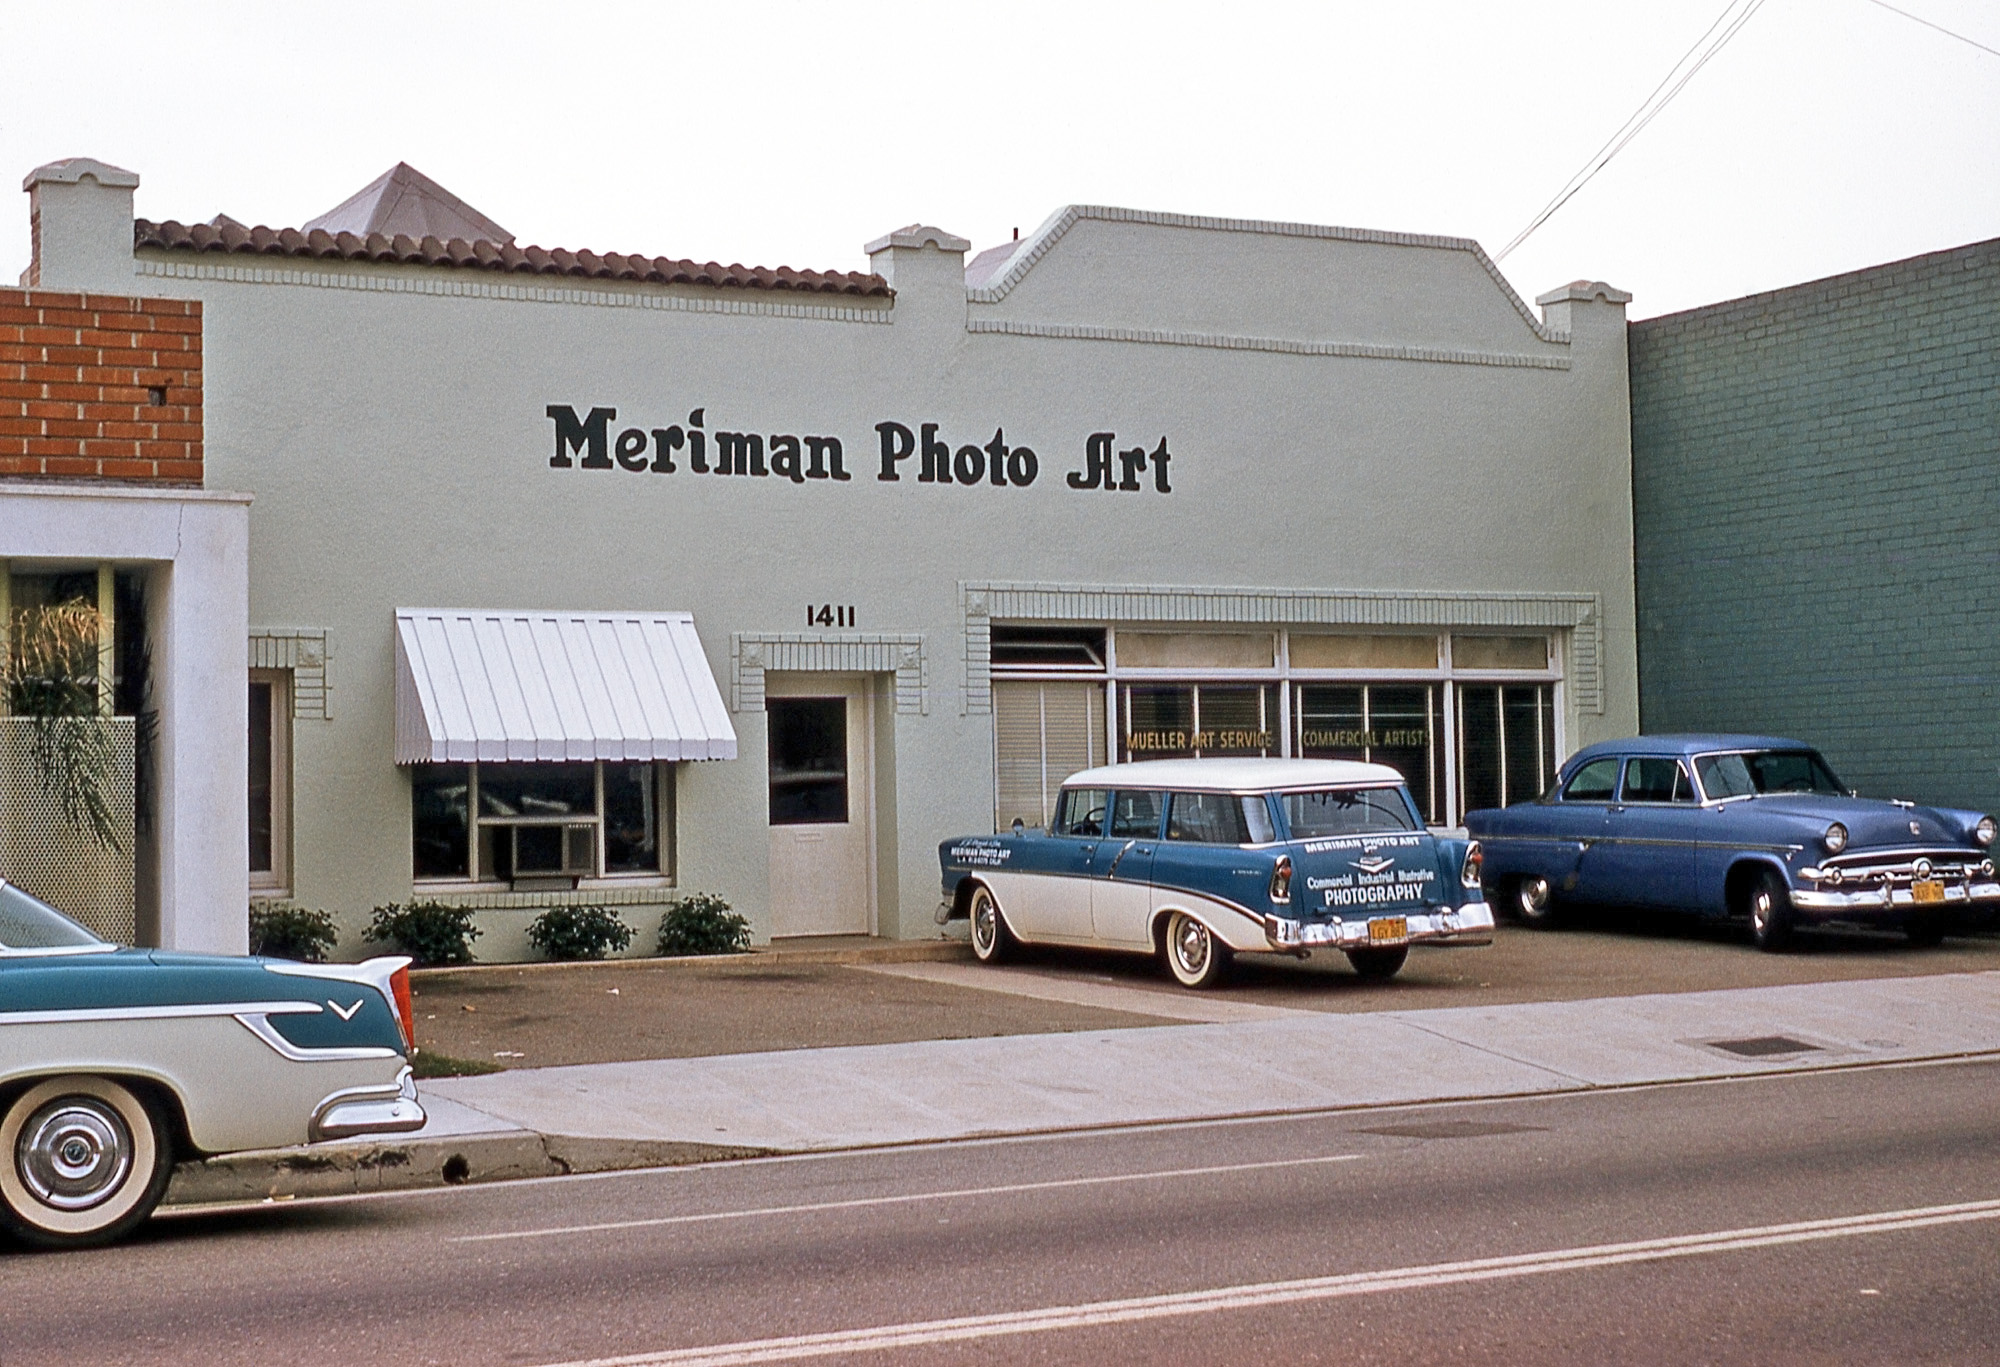 Meriman Photo Art, 1411 Maple Ave., Los Angeles, California. Kodachrome slide taken in 1957 that I found in a thrift store. View full size.